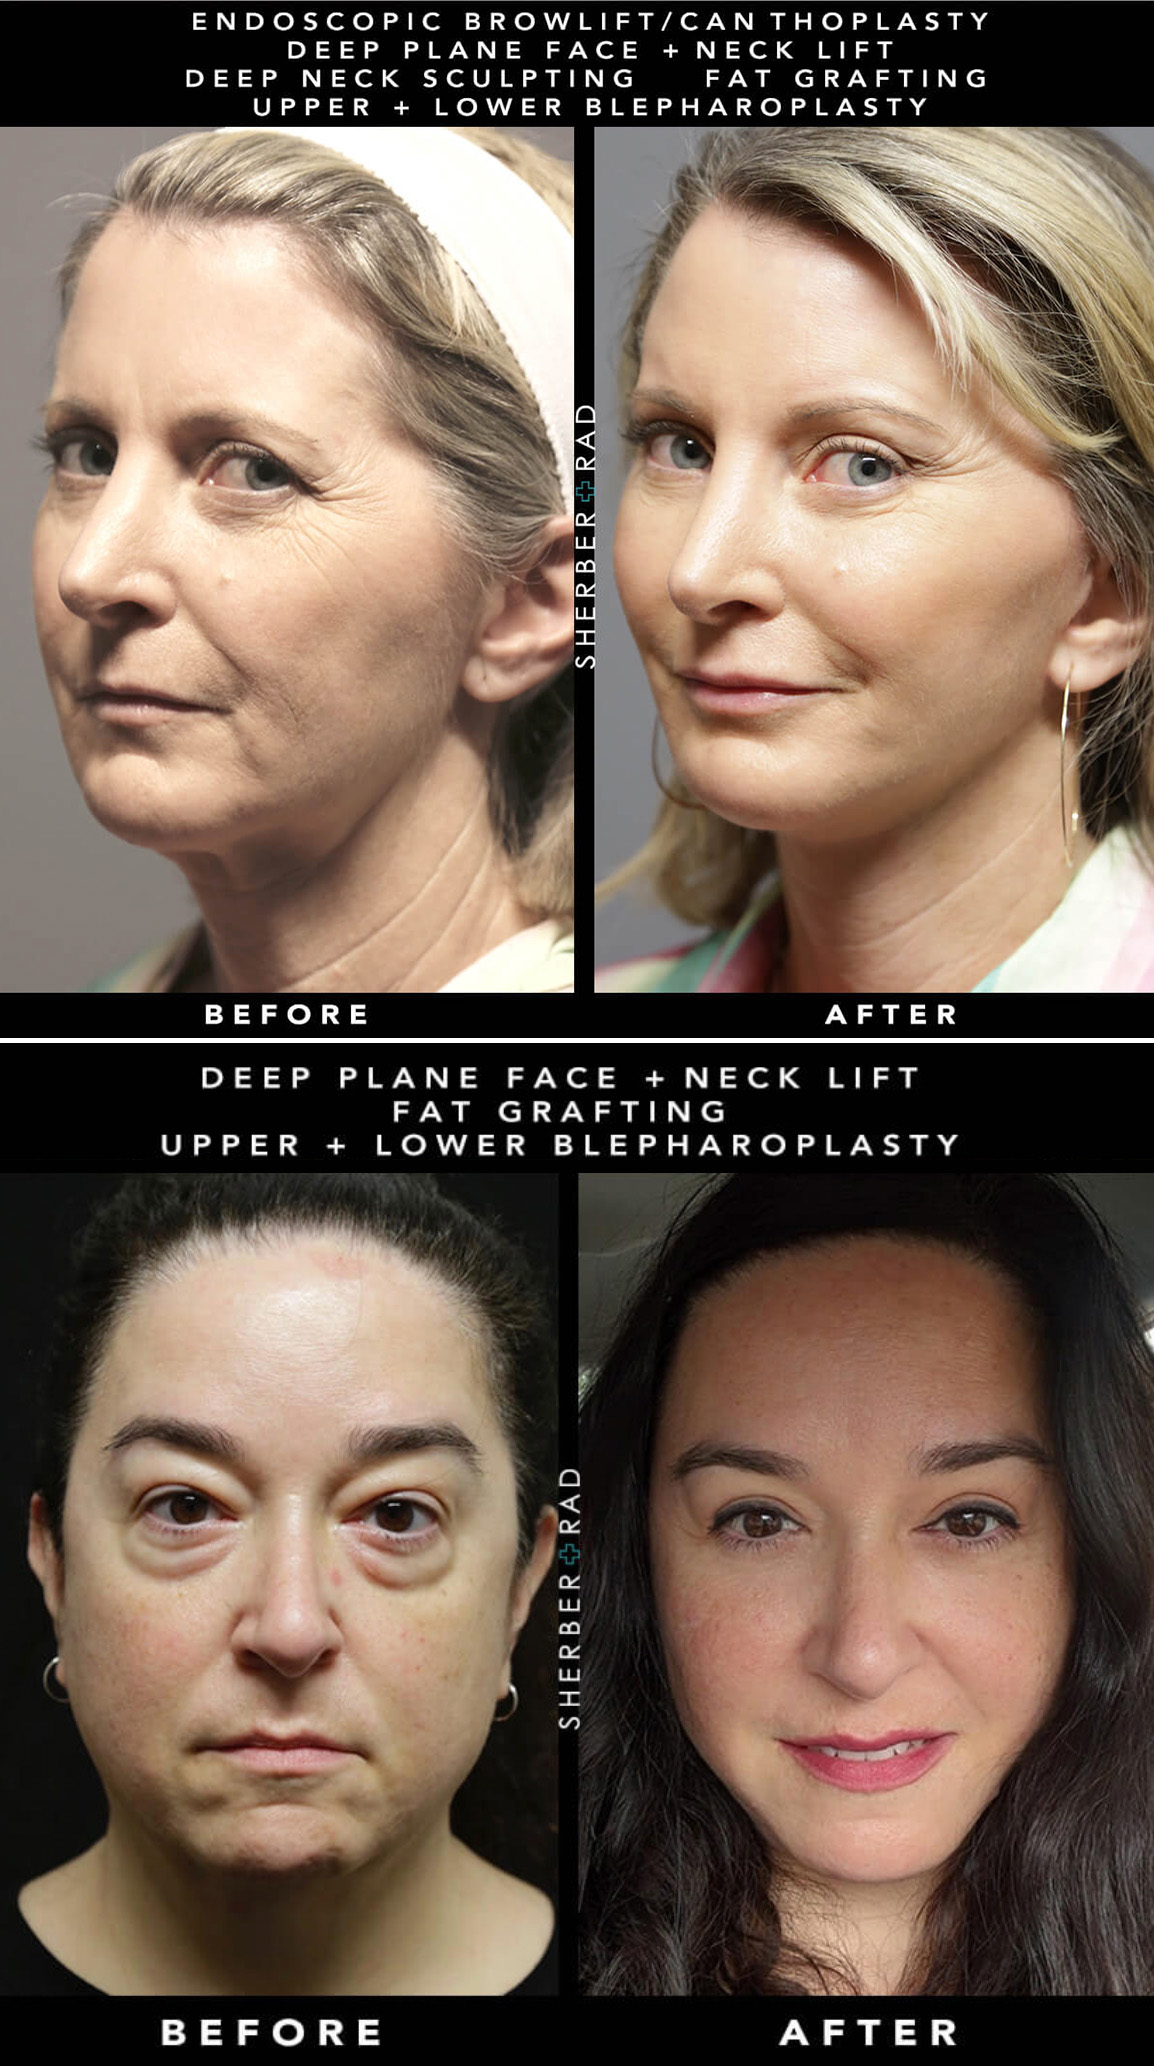 How to get a natural facelift without Botox or surgery with a